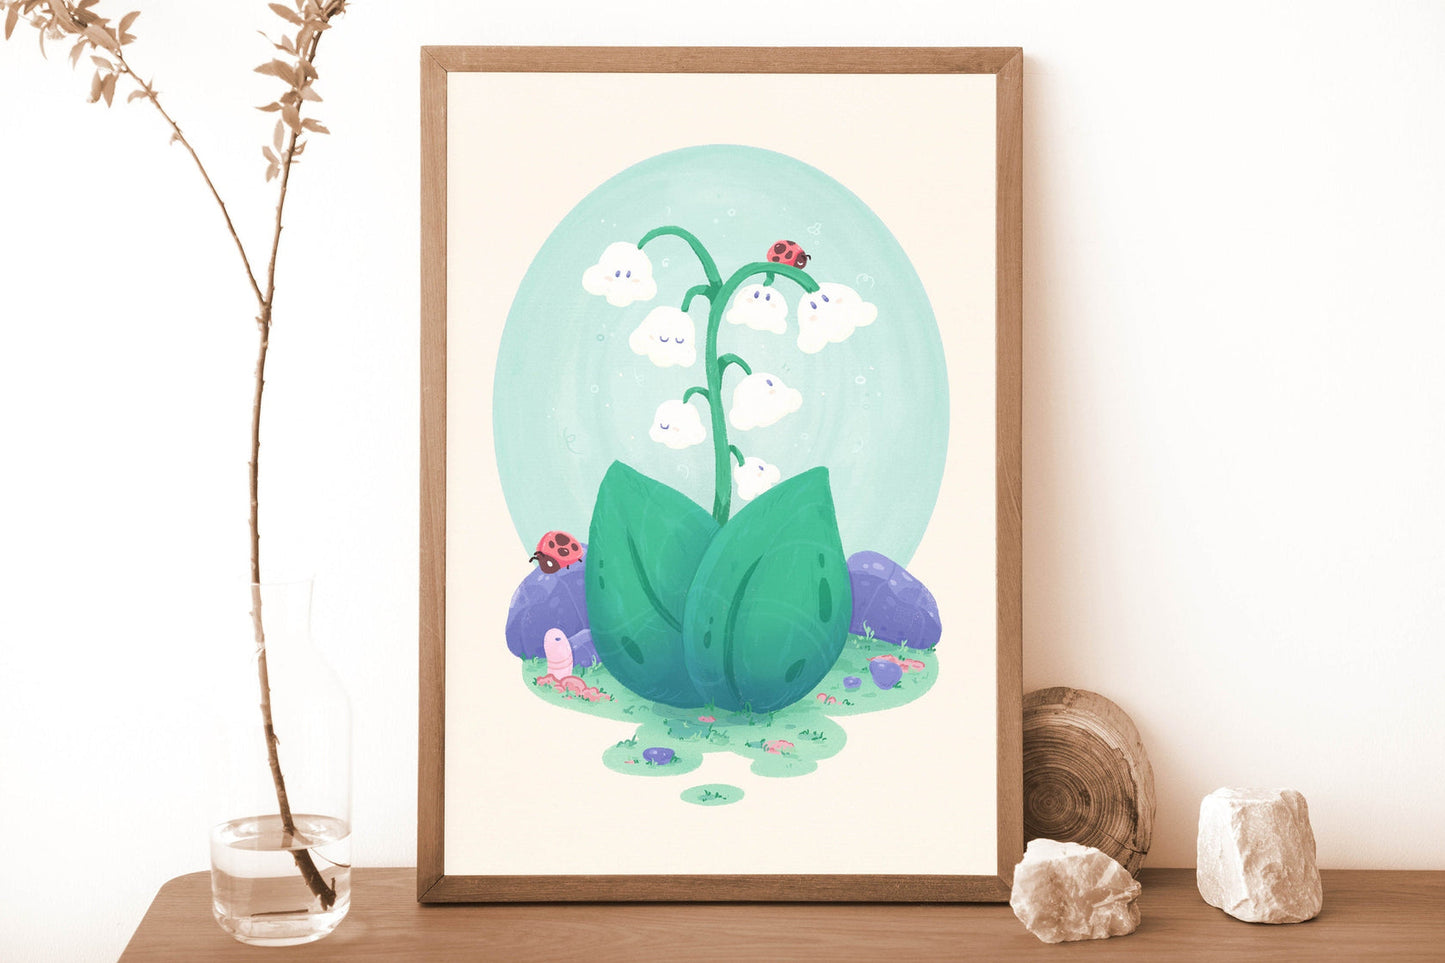 Lilies of the Valley & Friends A4 Print | Cozy Earthy Nature Art Print | Premium Linen Cardboard | Home Decor | Wall Art | Art by Miamouz